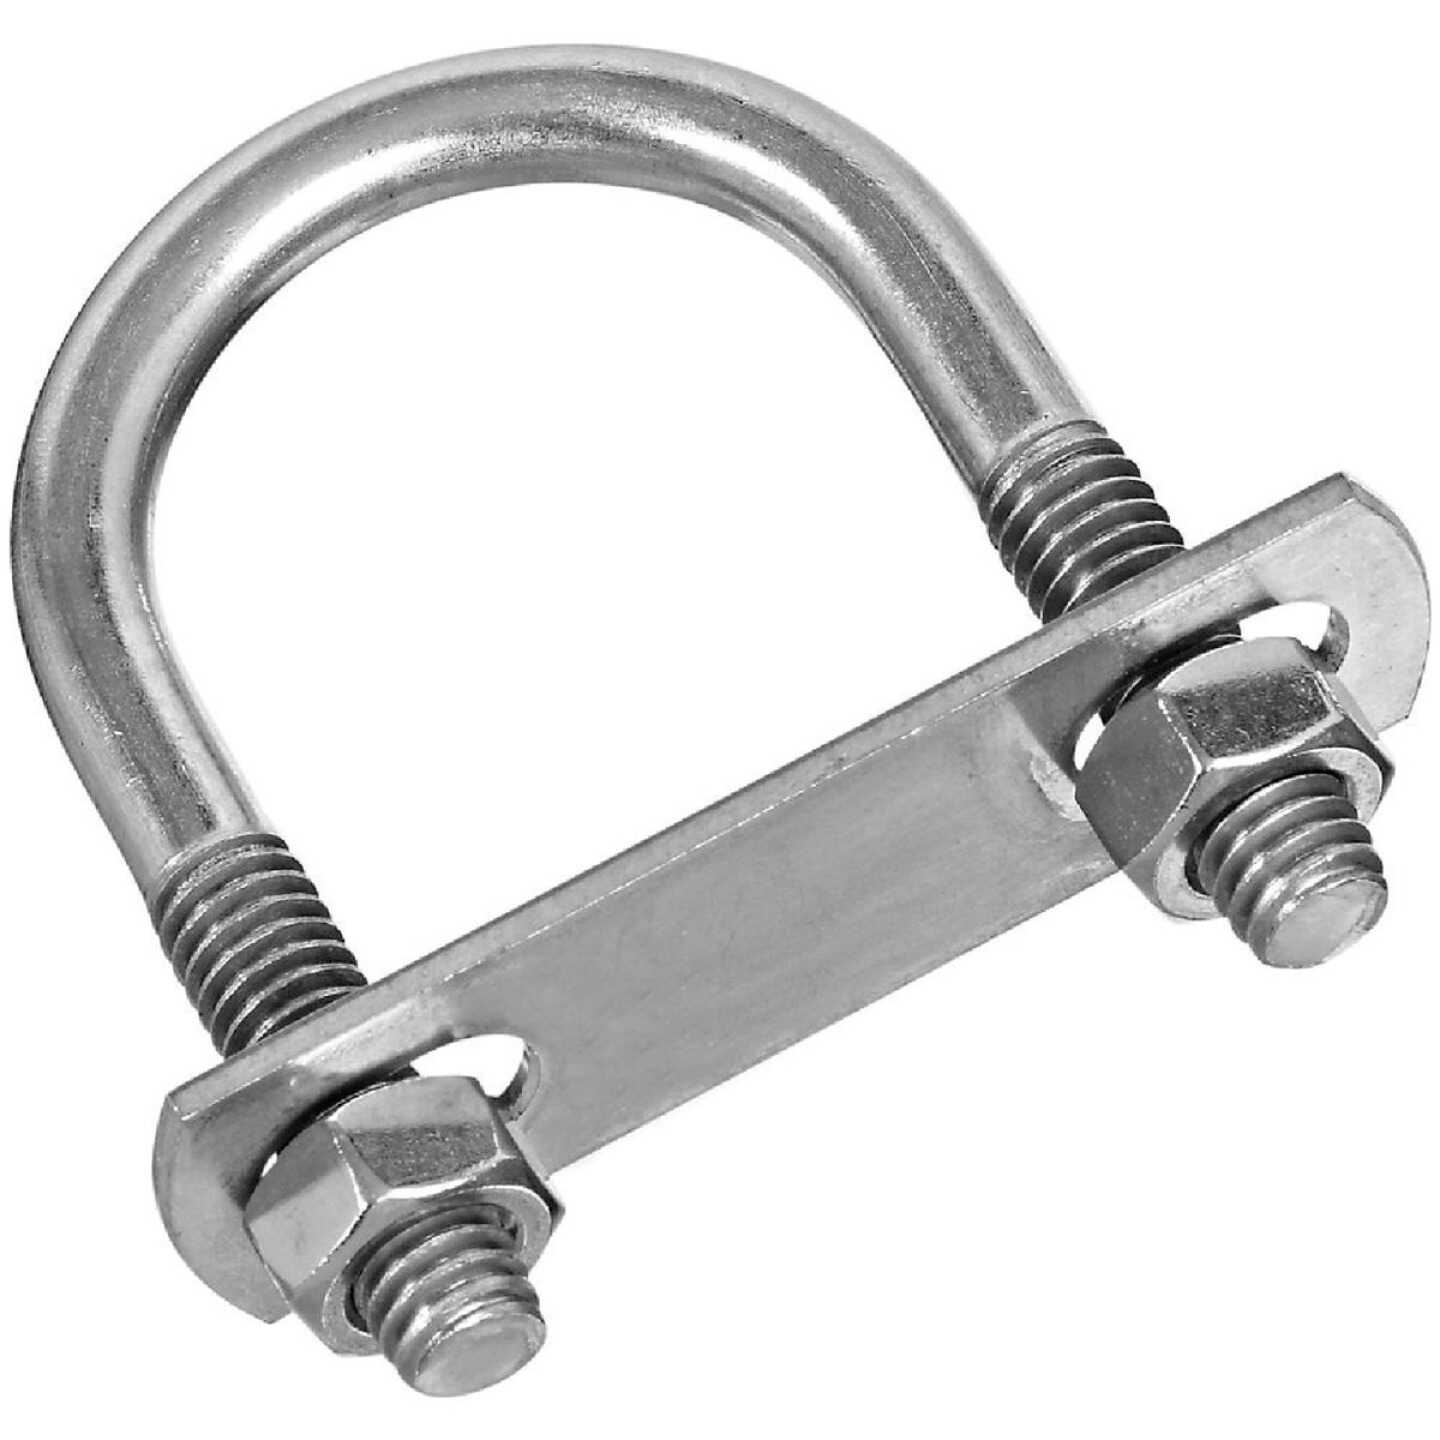 National 5/16 In. x 1-3/8 In. x 2-1/2 In. Stainless Steel Round U Bolt Image 1